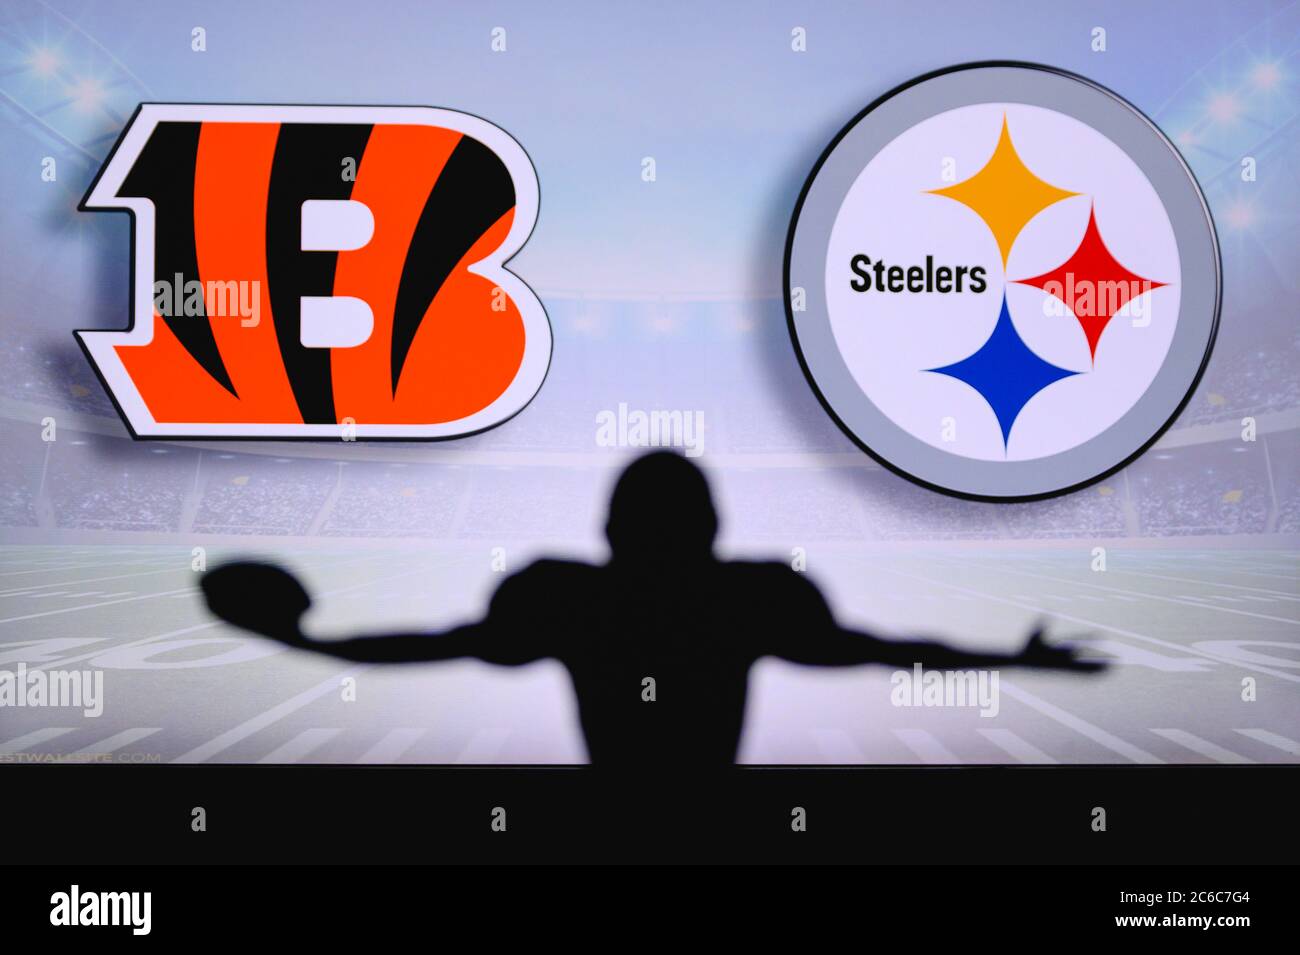 Cincinnati Bengals vs. Pittsburgh Steelers . NFL Game. American Football League match. Silhouette of professional player celebrate touch down. Screen Stock Photo